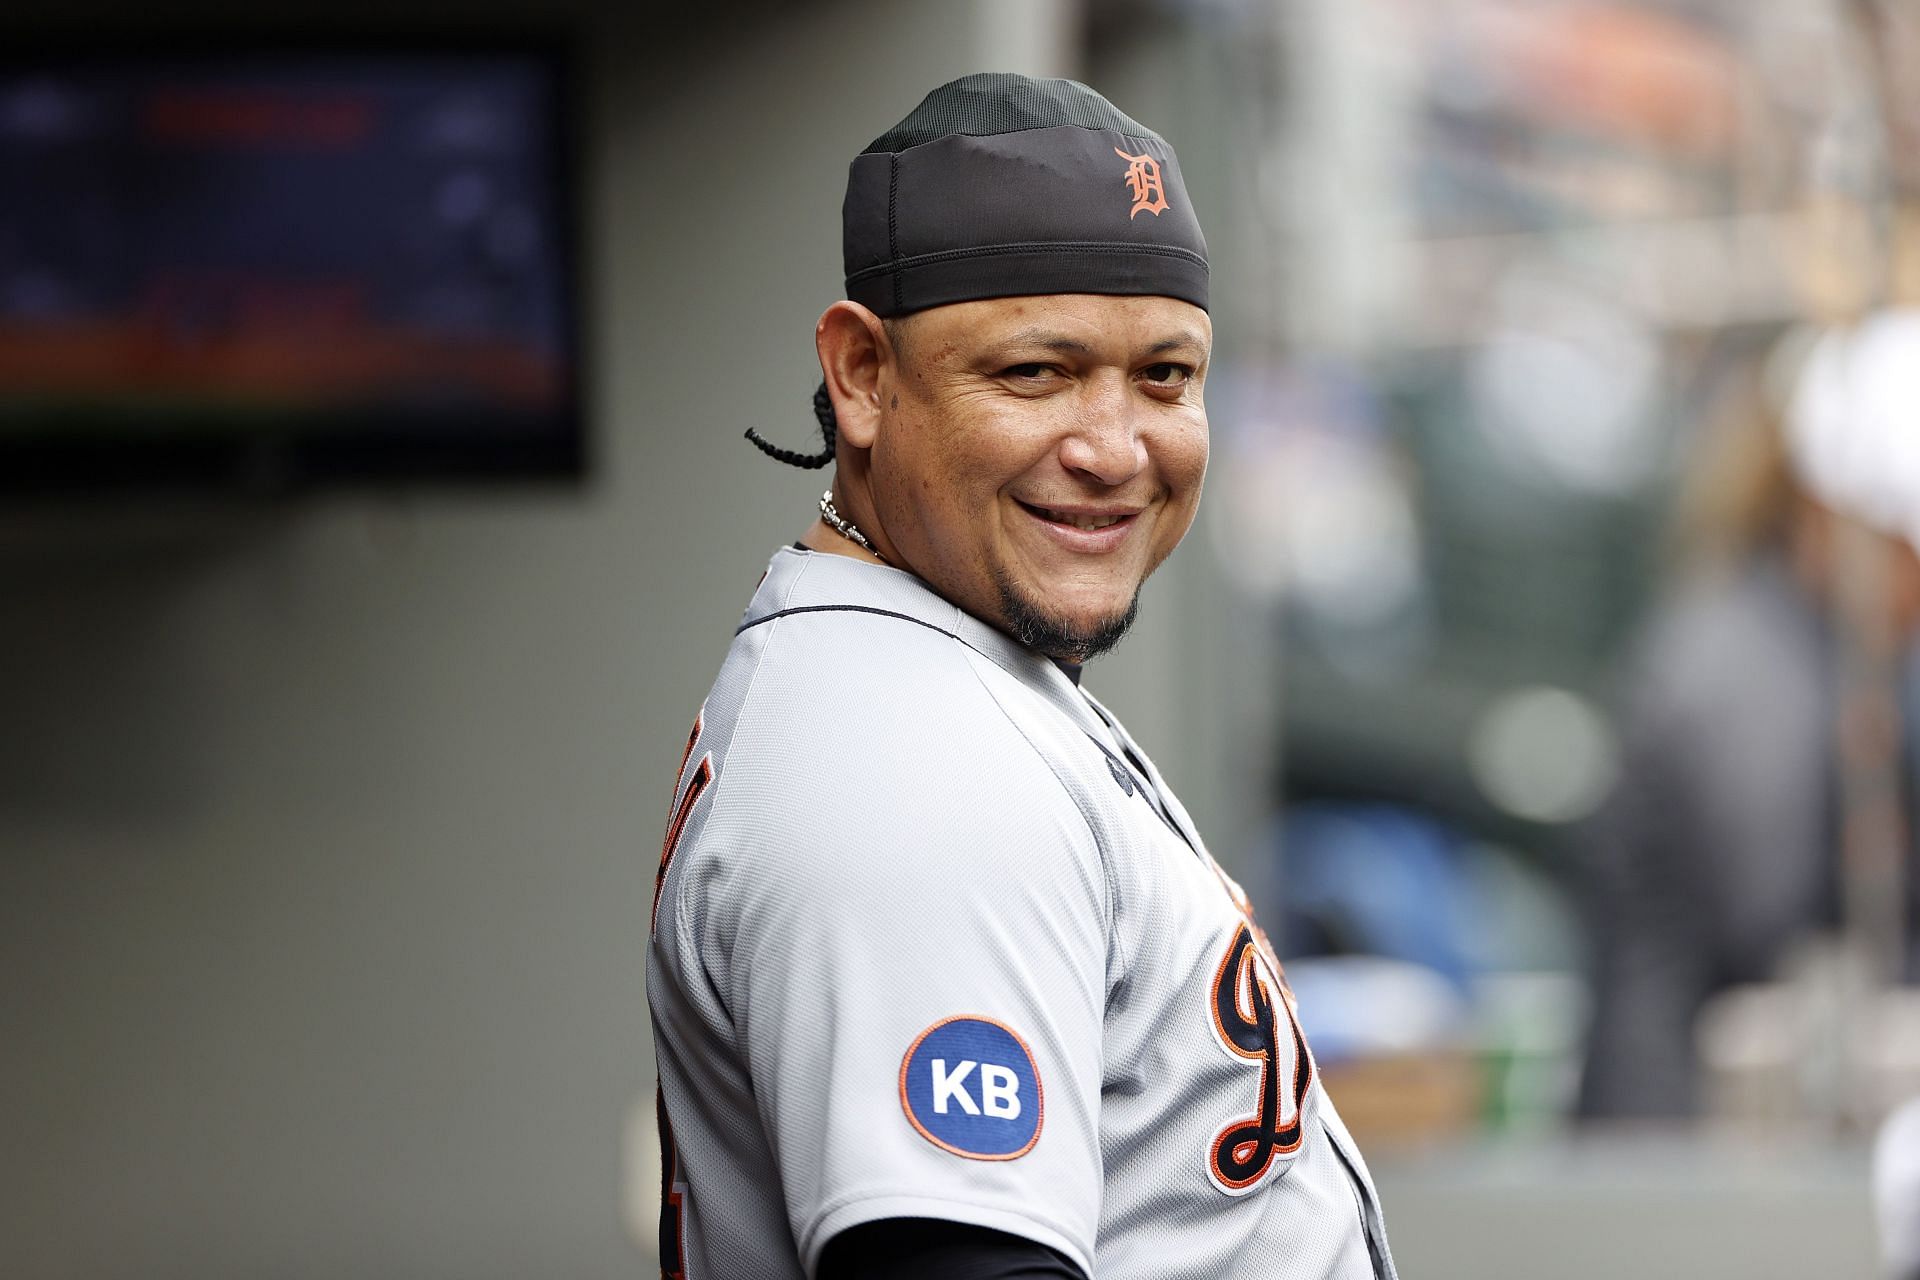 Tigers' Cabrera Smiles His Way to a Triple Crown - The New York Times